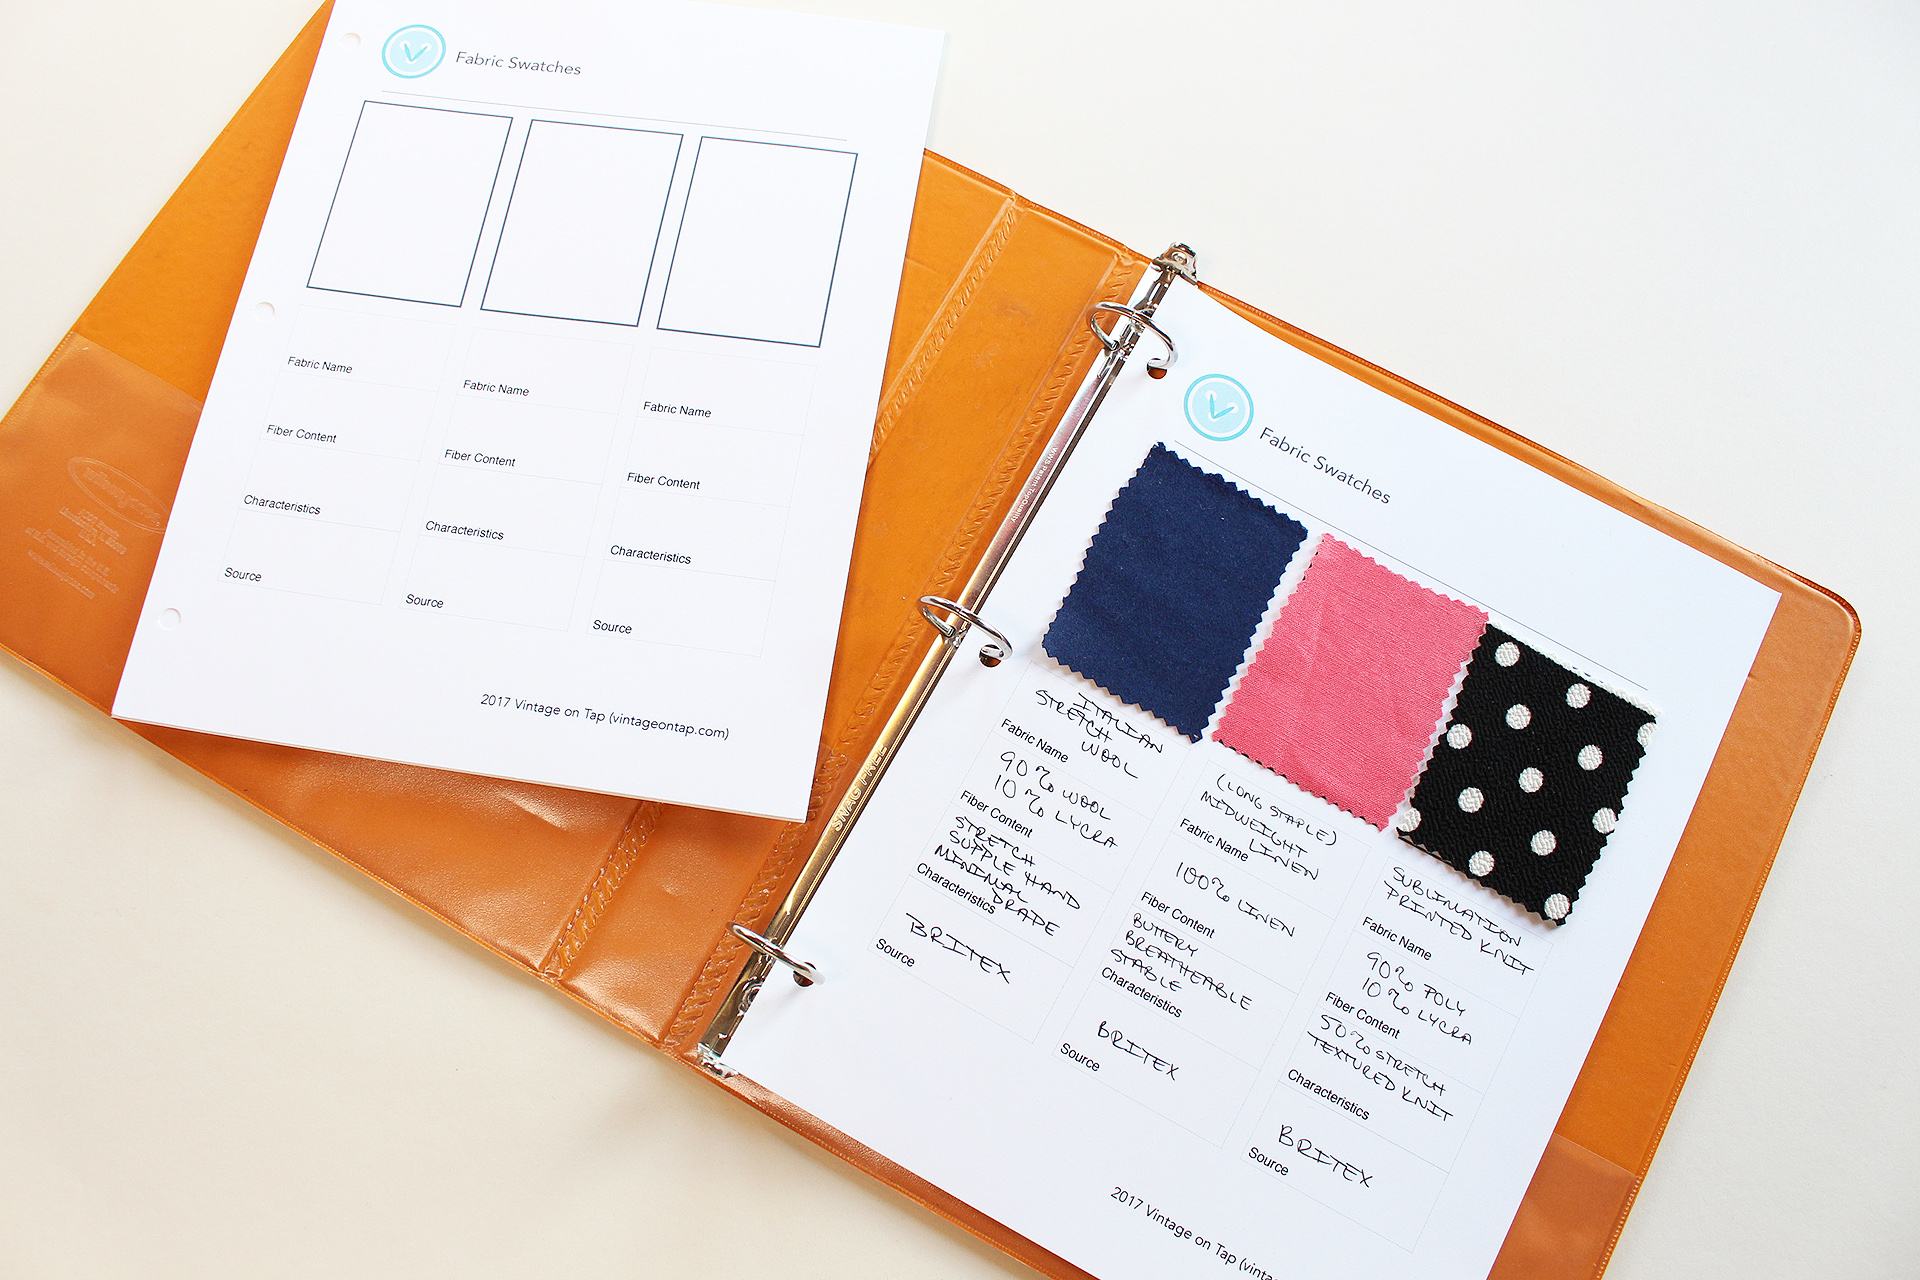 Fabric Swatch Book, Free Download | Vintage on Tap